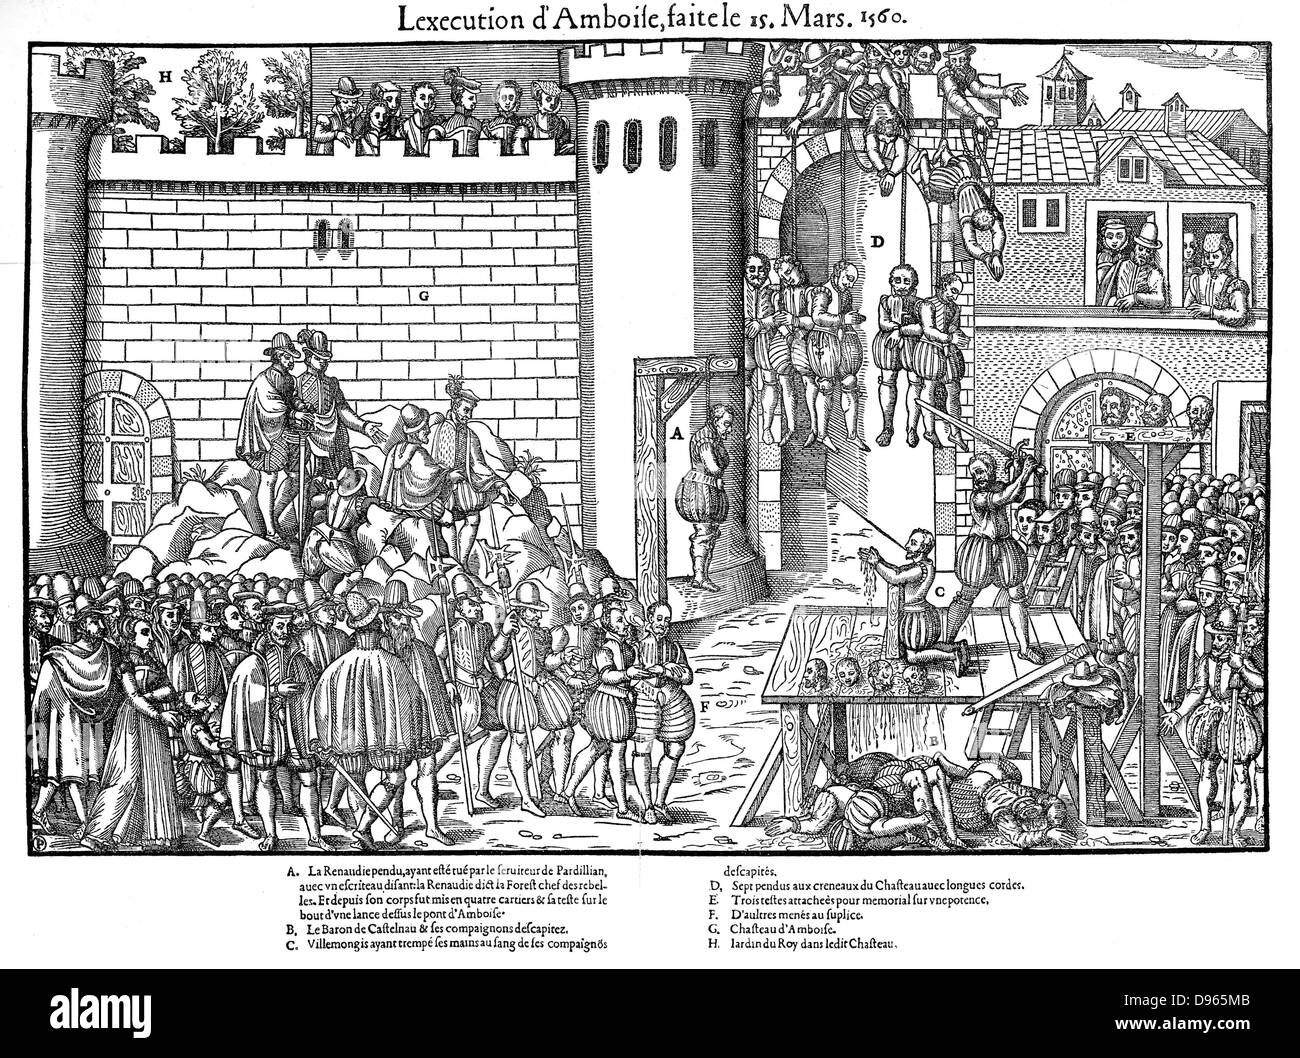 French Religious Wars 1562-1598.  Amboise Enterprise or Conspiracy March 1560. Execution at Amboise, 15 March. Execution by hanging or decapitation by the sword of conspirators in Huguenot plot led by Jean du Barry seigneur of La Renaudie (?-1560),whose body swings on gibbet at A, against the Guise faction.   Engraving by Jacques Tortorel (fl1568-1590) and Jean-Jacques Perrissin (c1536-1617) from their series on the Huguenot Wars. Stock Photo